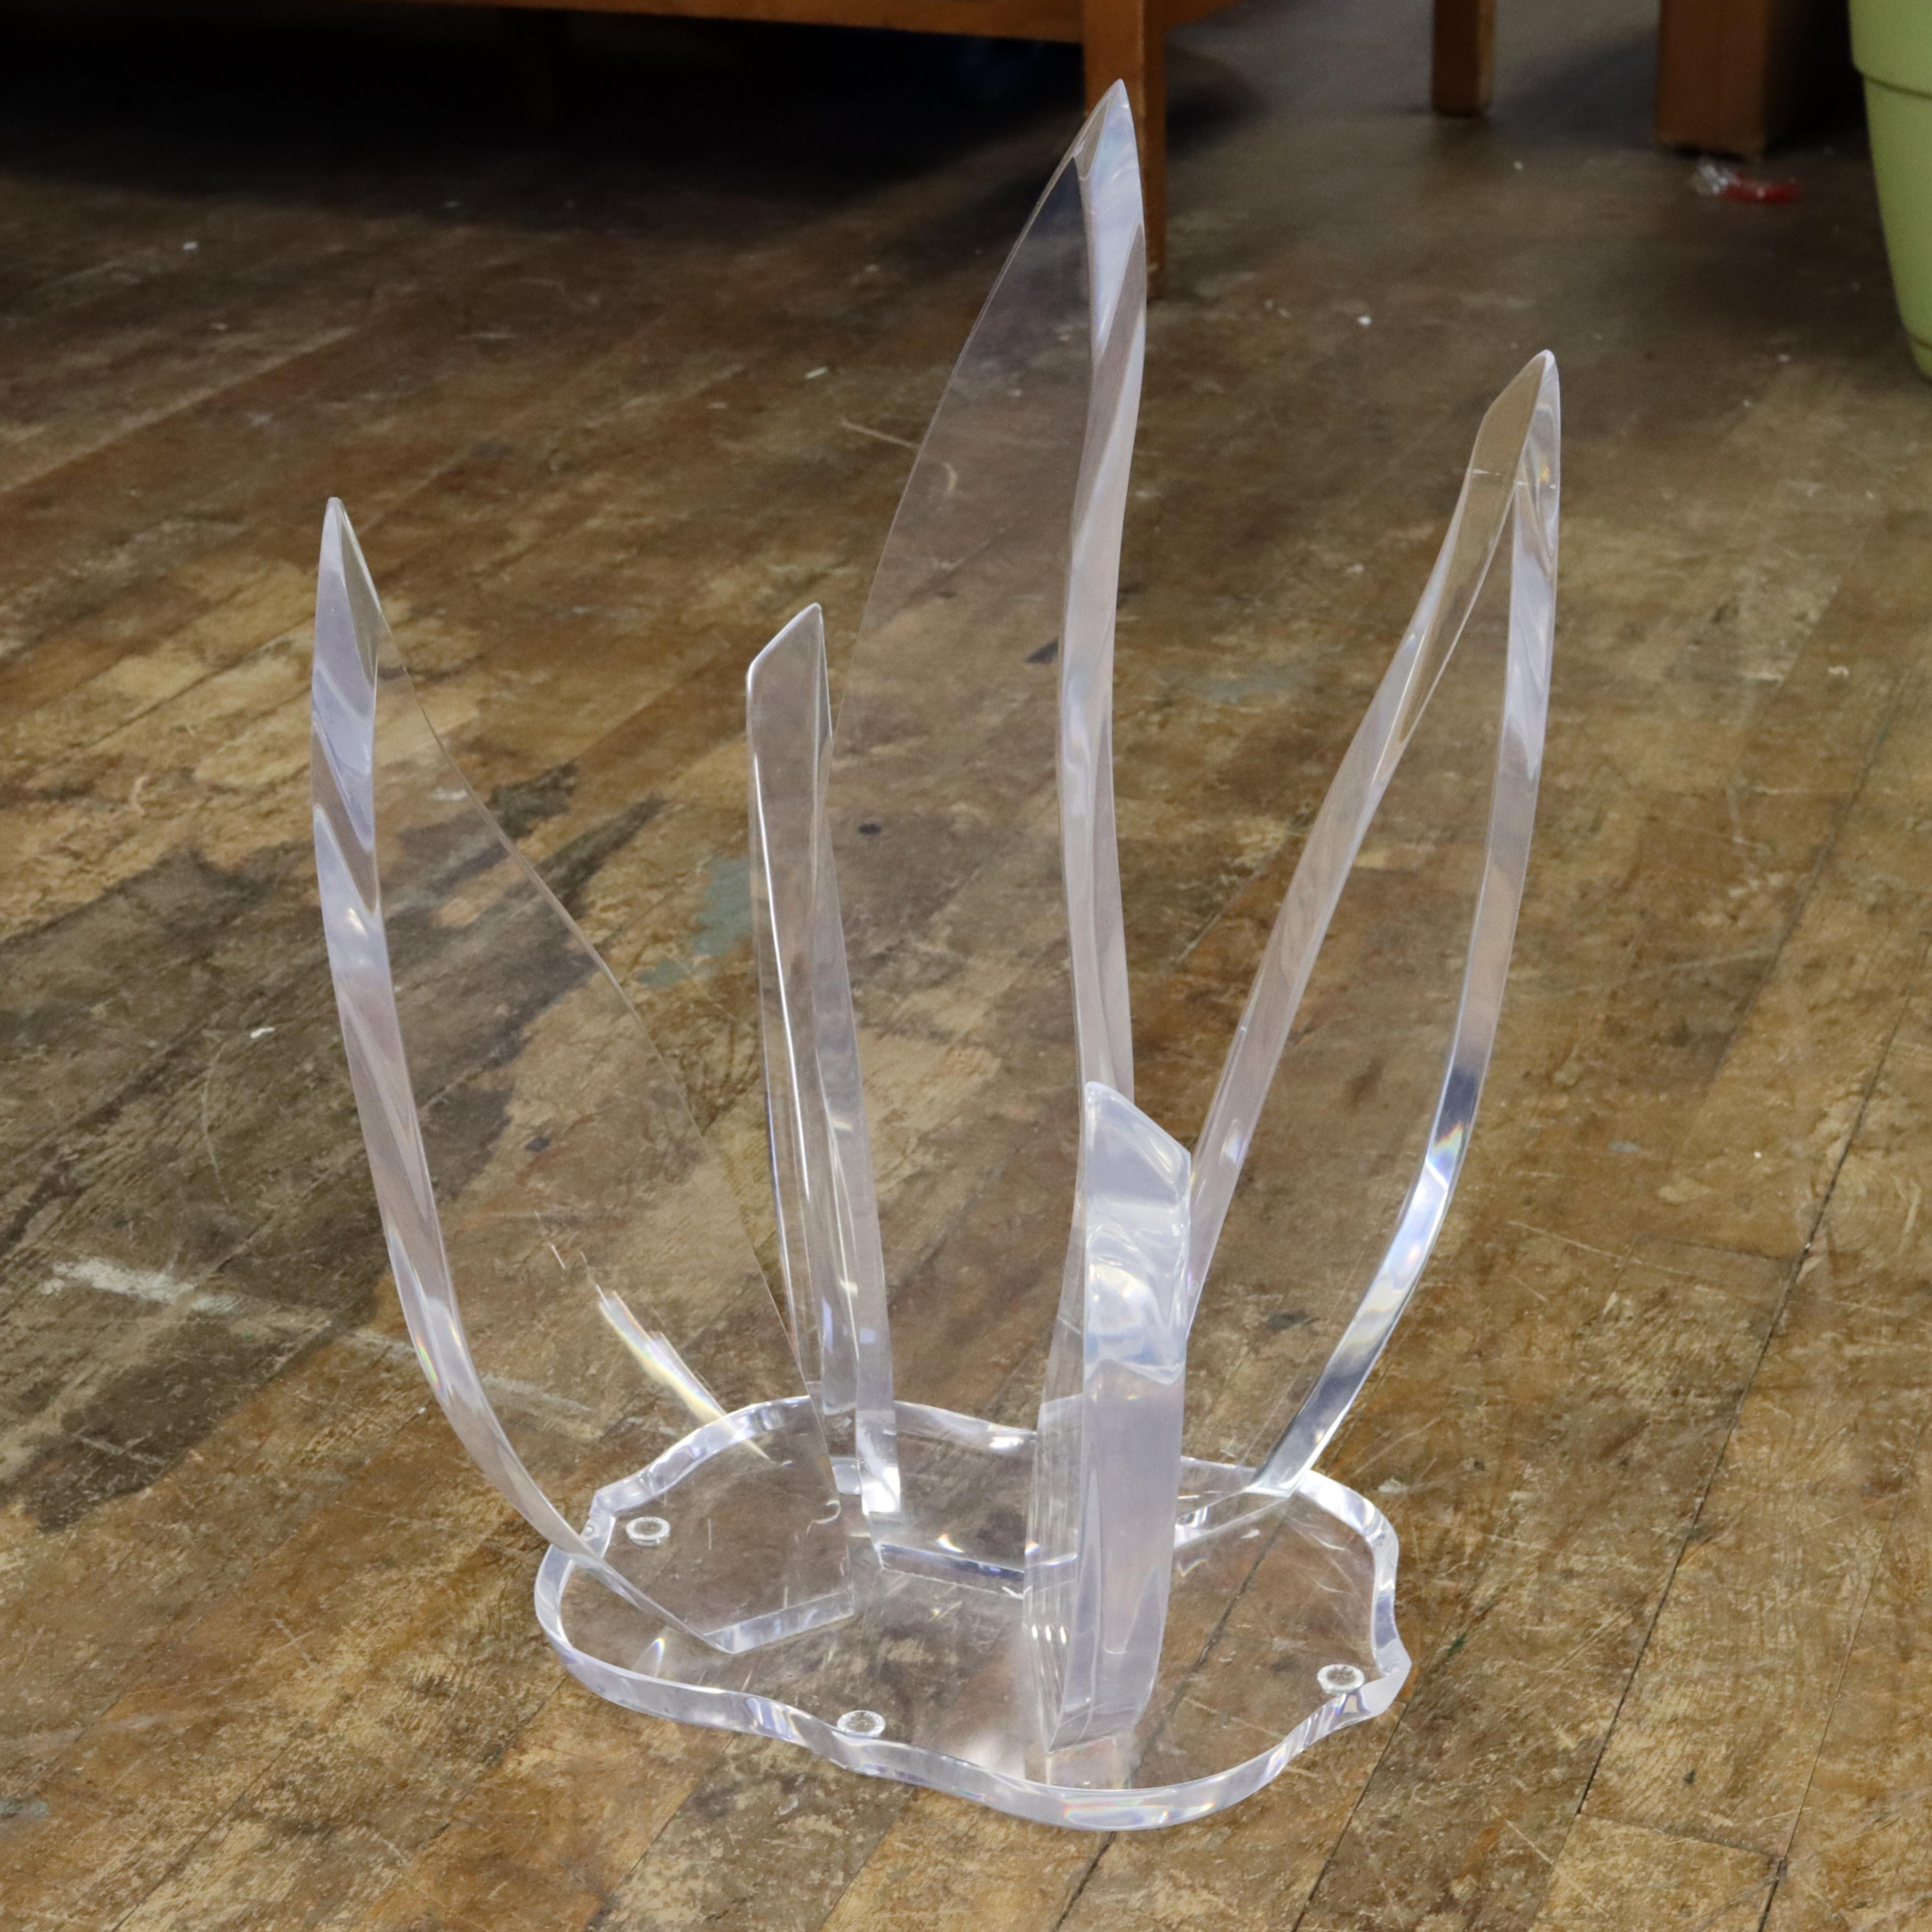 A beautiful clear lucite flame style sculpture by Miami Acrylics. In great condition with no breaks or major wear. A great vintage piece.

Measures 18 1/2” tall x 10” x 12”.